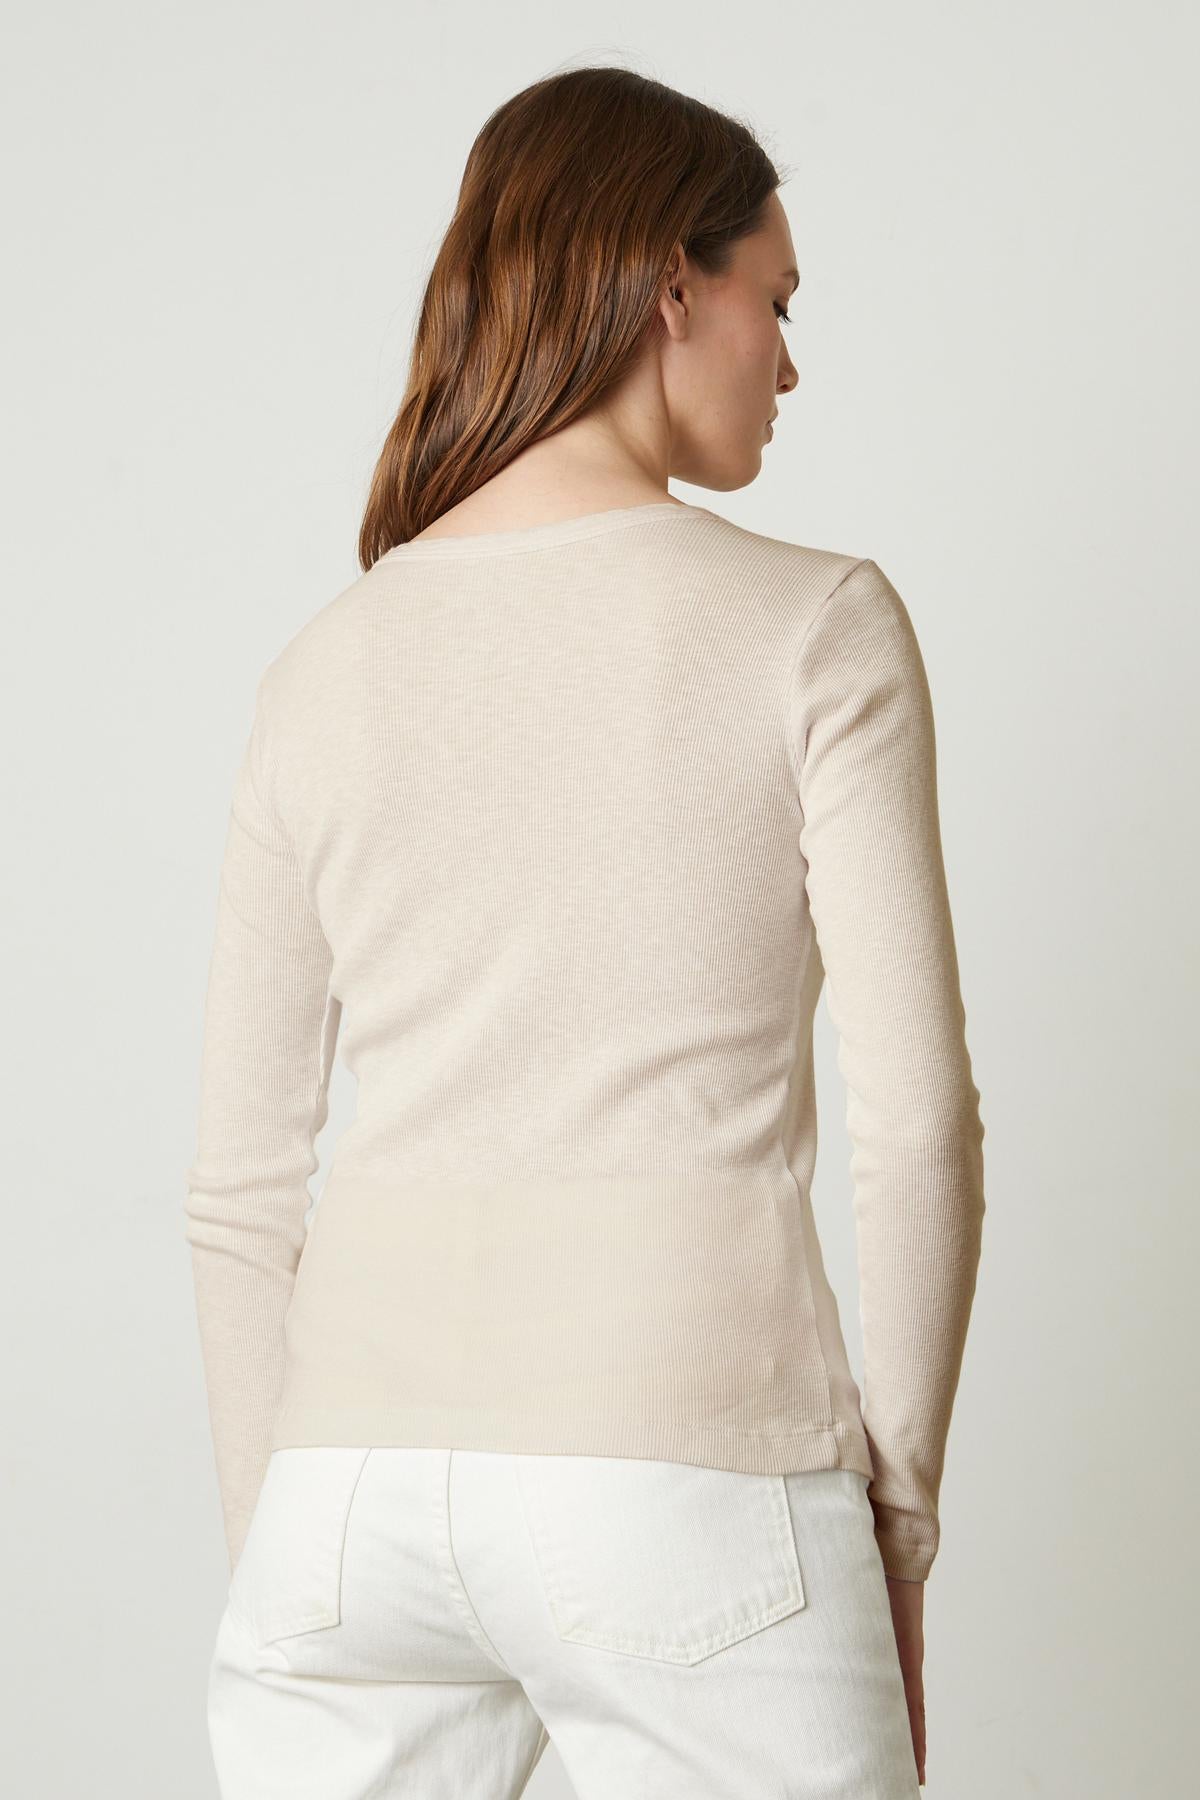   The back view of a woman wearing a Velvet by Graham & Spencer BAYLER RIBBED SCOOP NECK TEE sweater. 